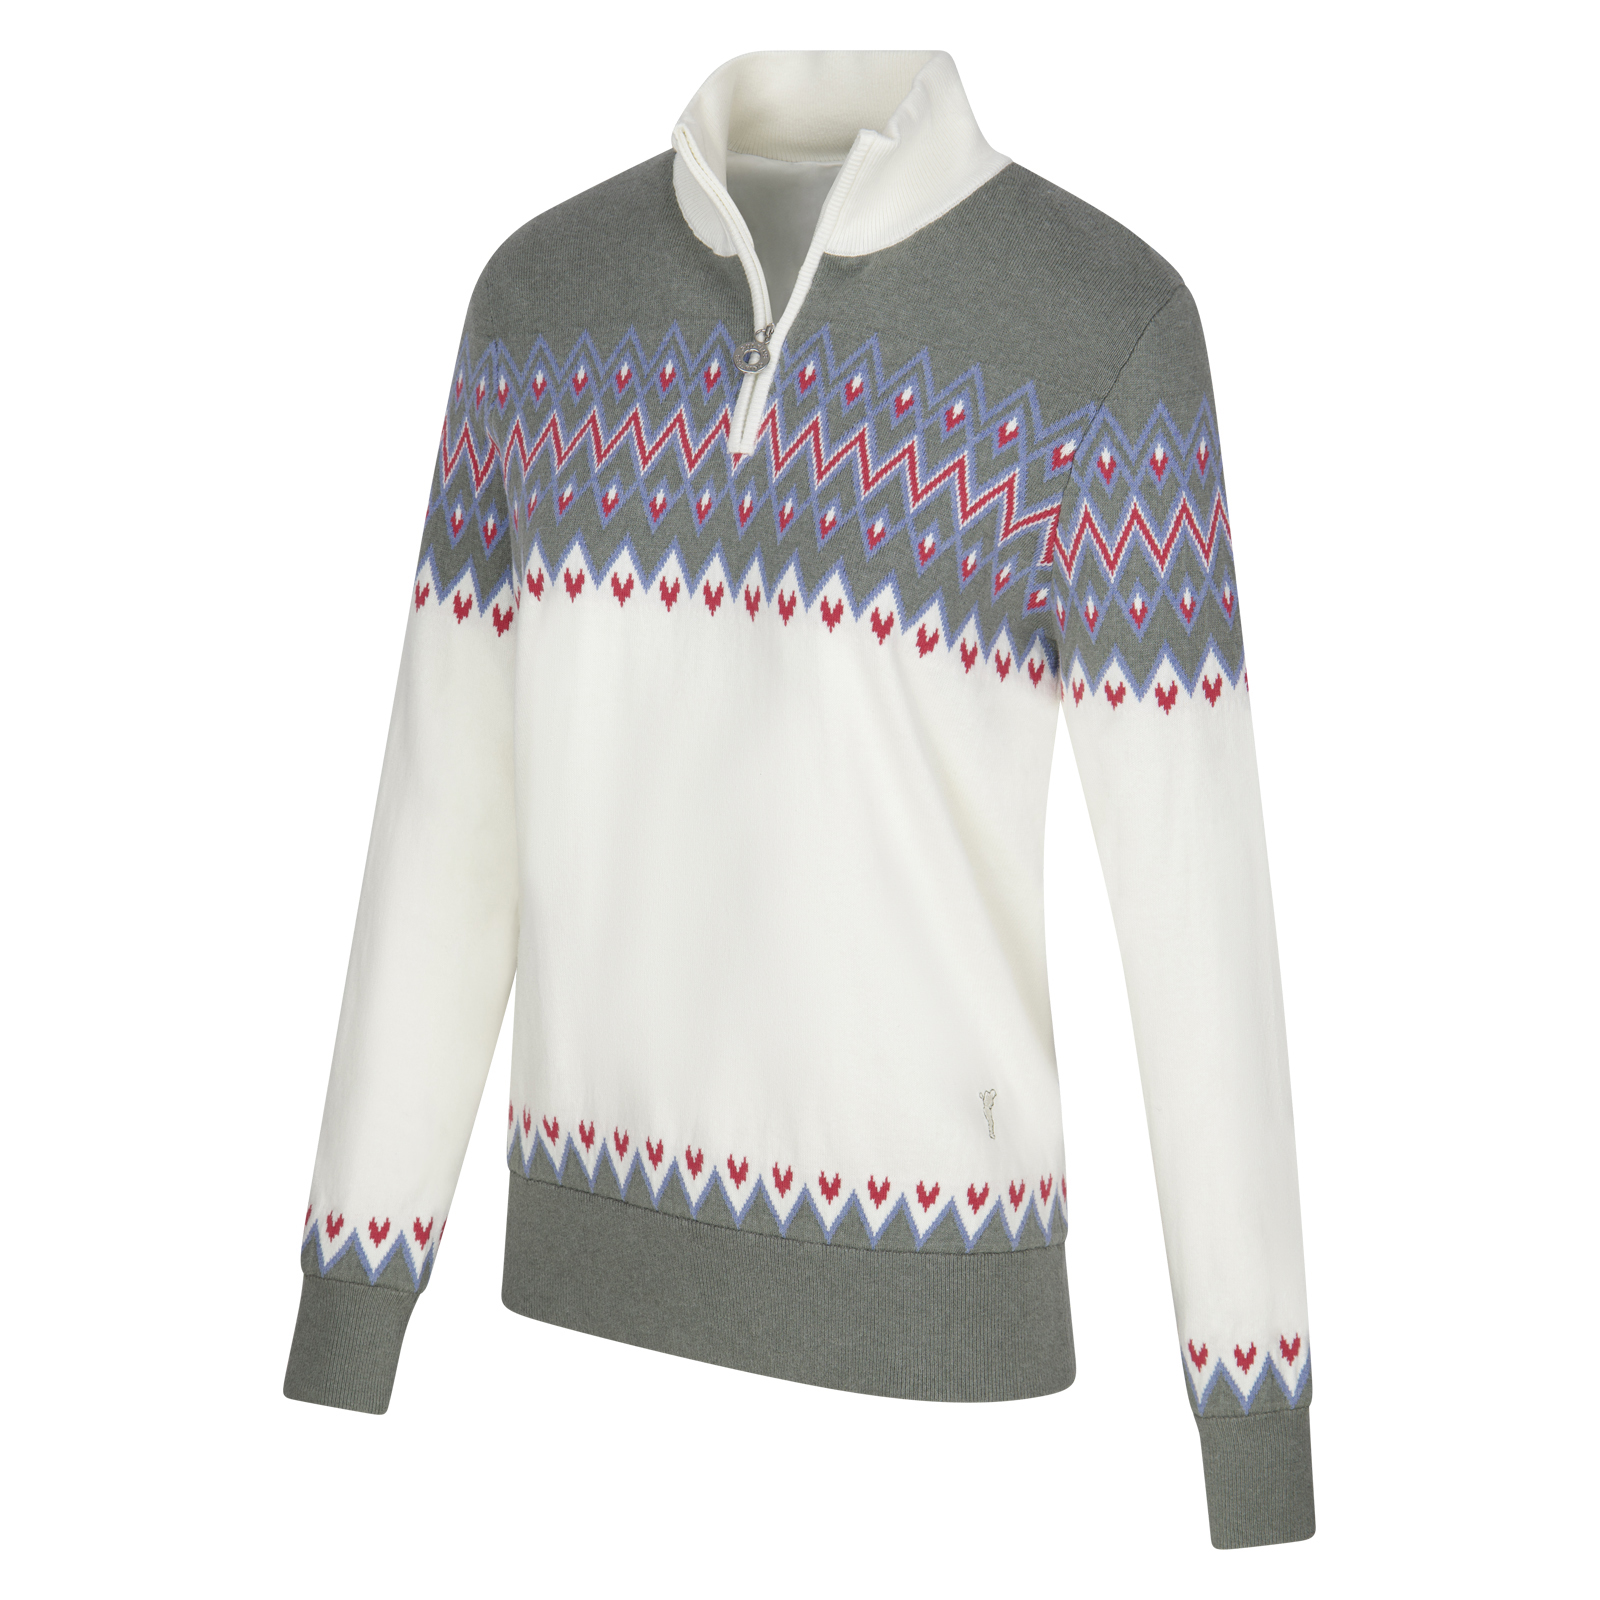 Ladies' knitted golf windbreaker with fine cashmere